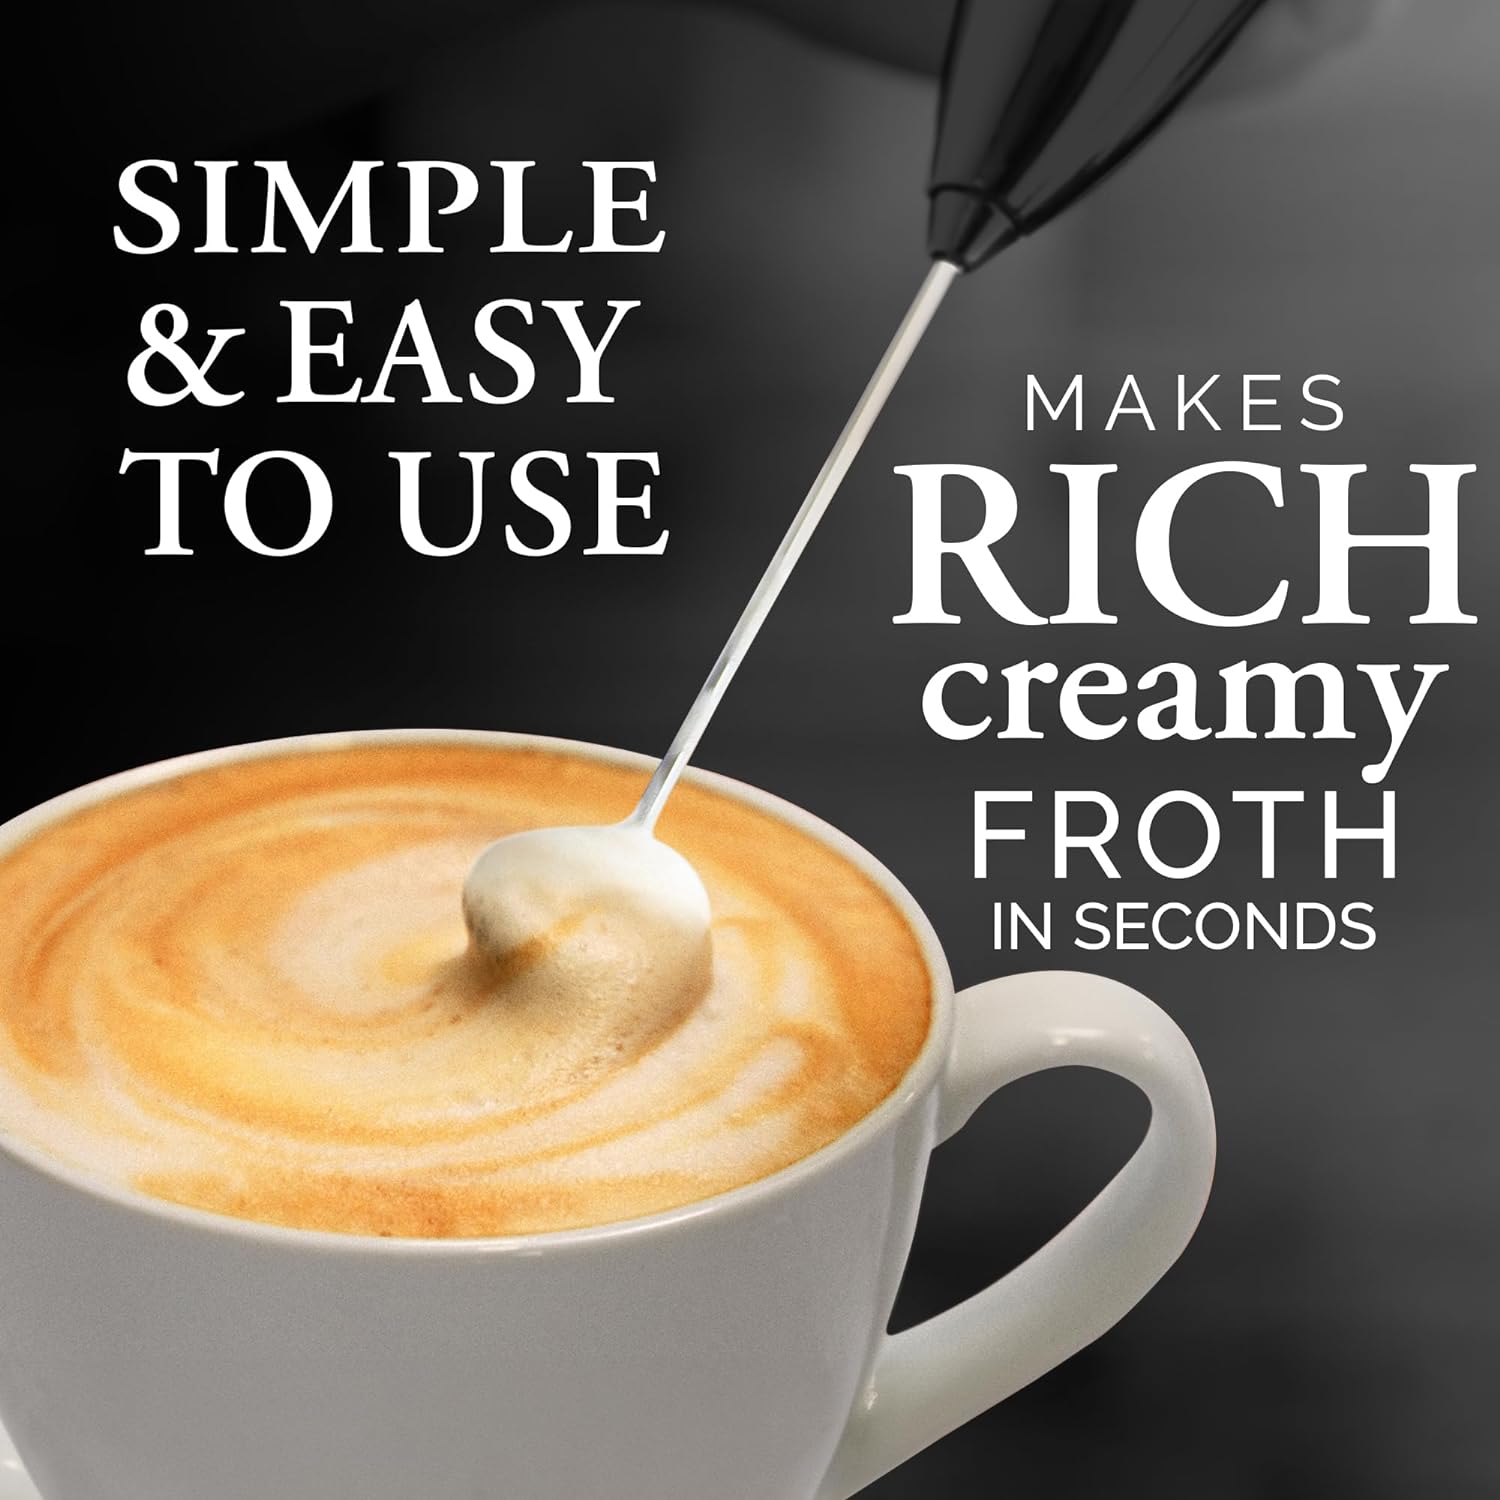 Simple and easy to use Executive Series Milk Frother